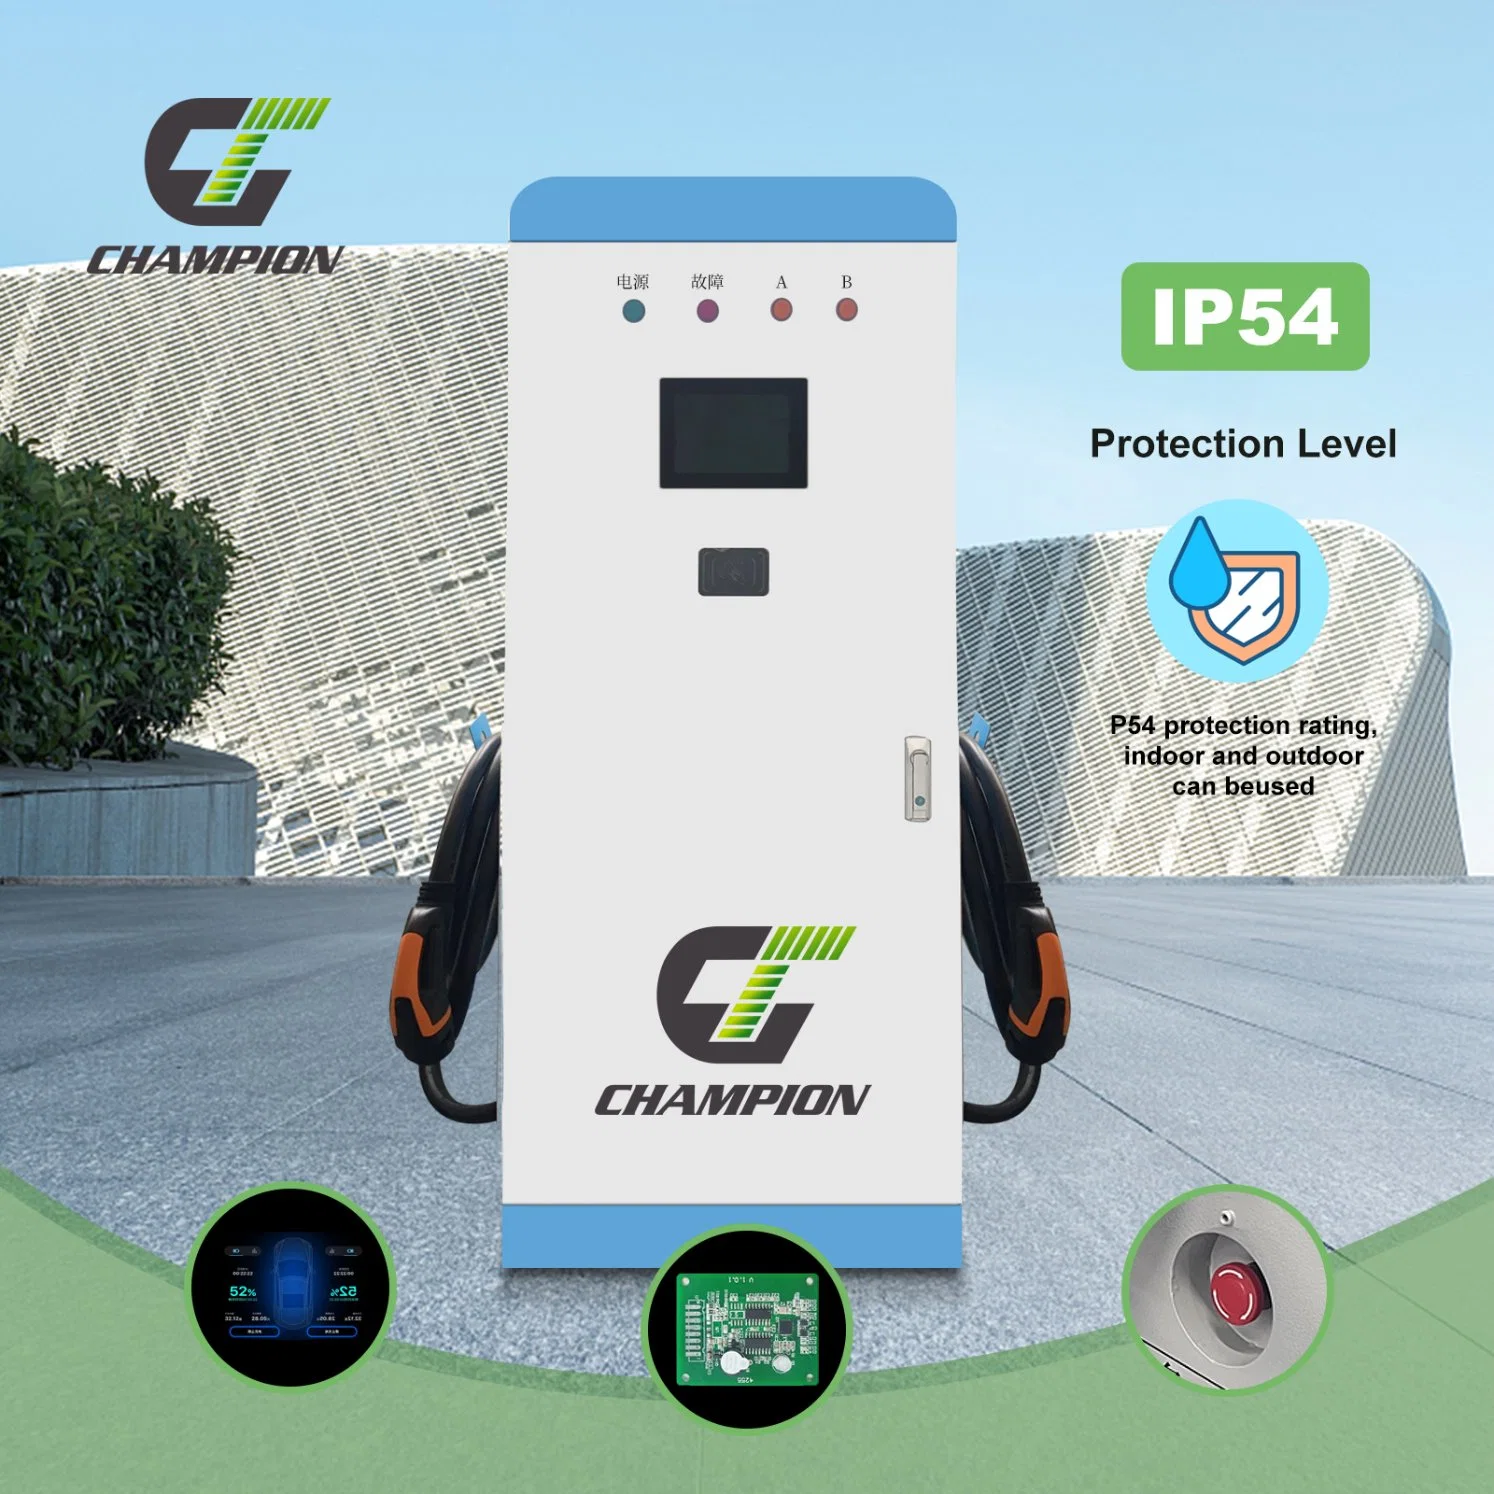 Factory Sale Floor-Mounted Super Fast DC EV Charging Stations 60kw 90kw 120kw 180kw 240kw EV Car Charger Station with Ocpp 4G WiFi Payment System